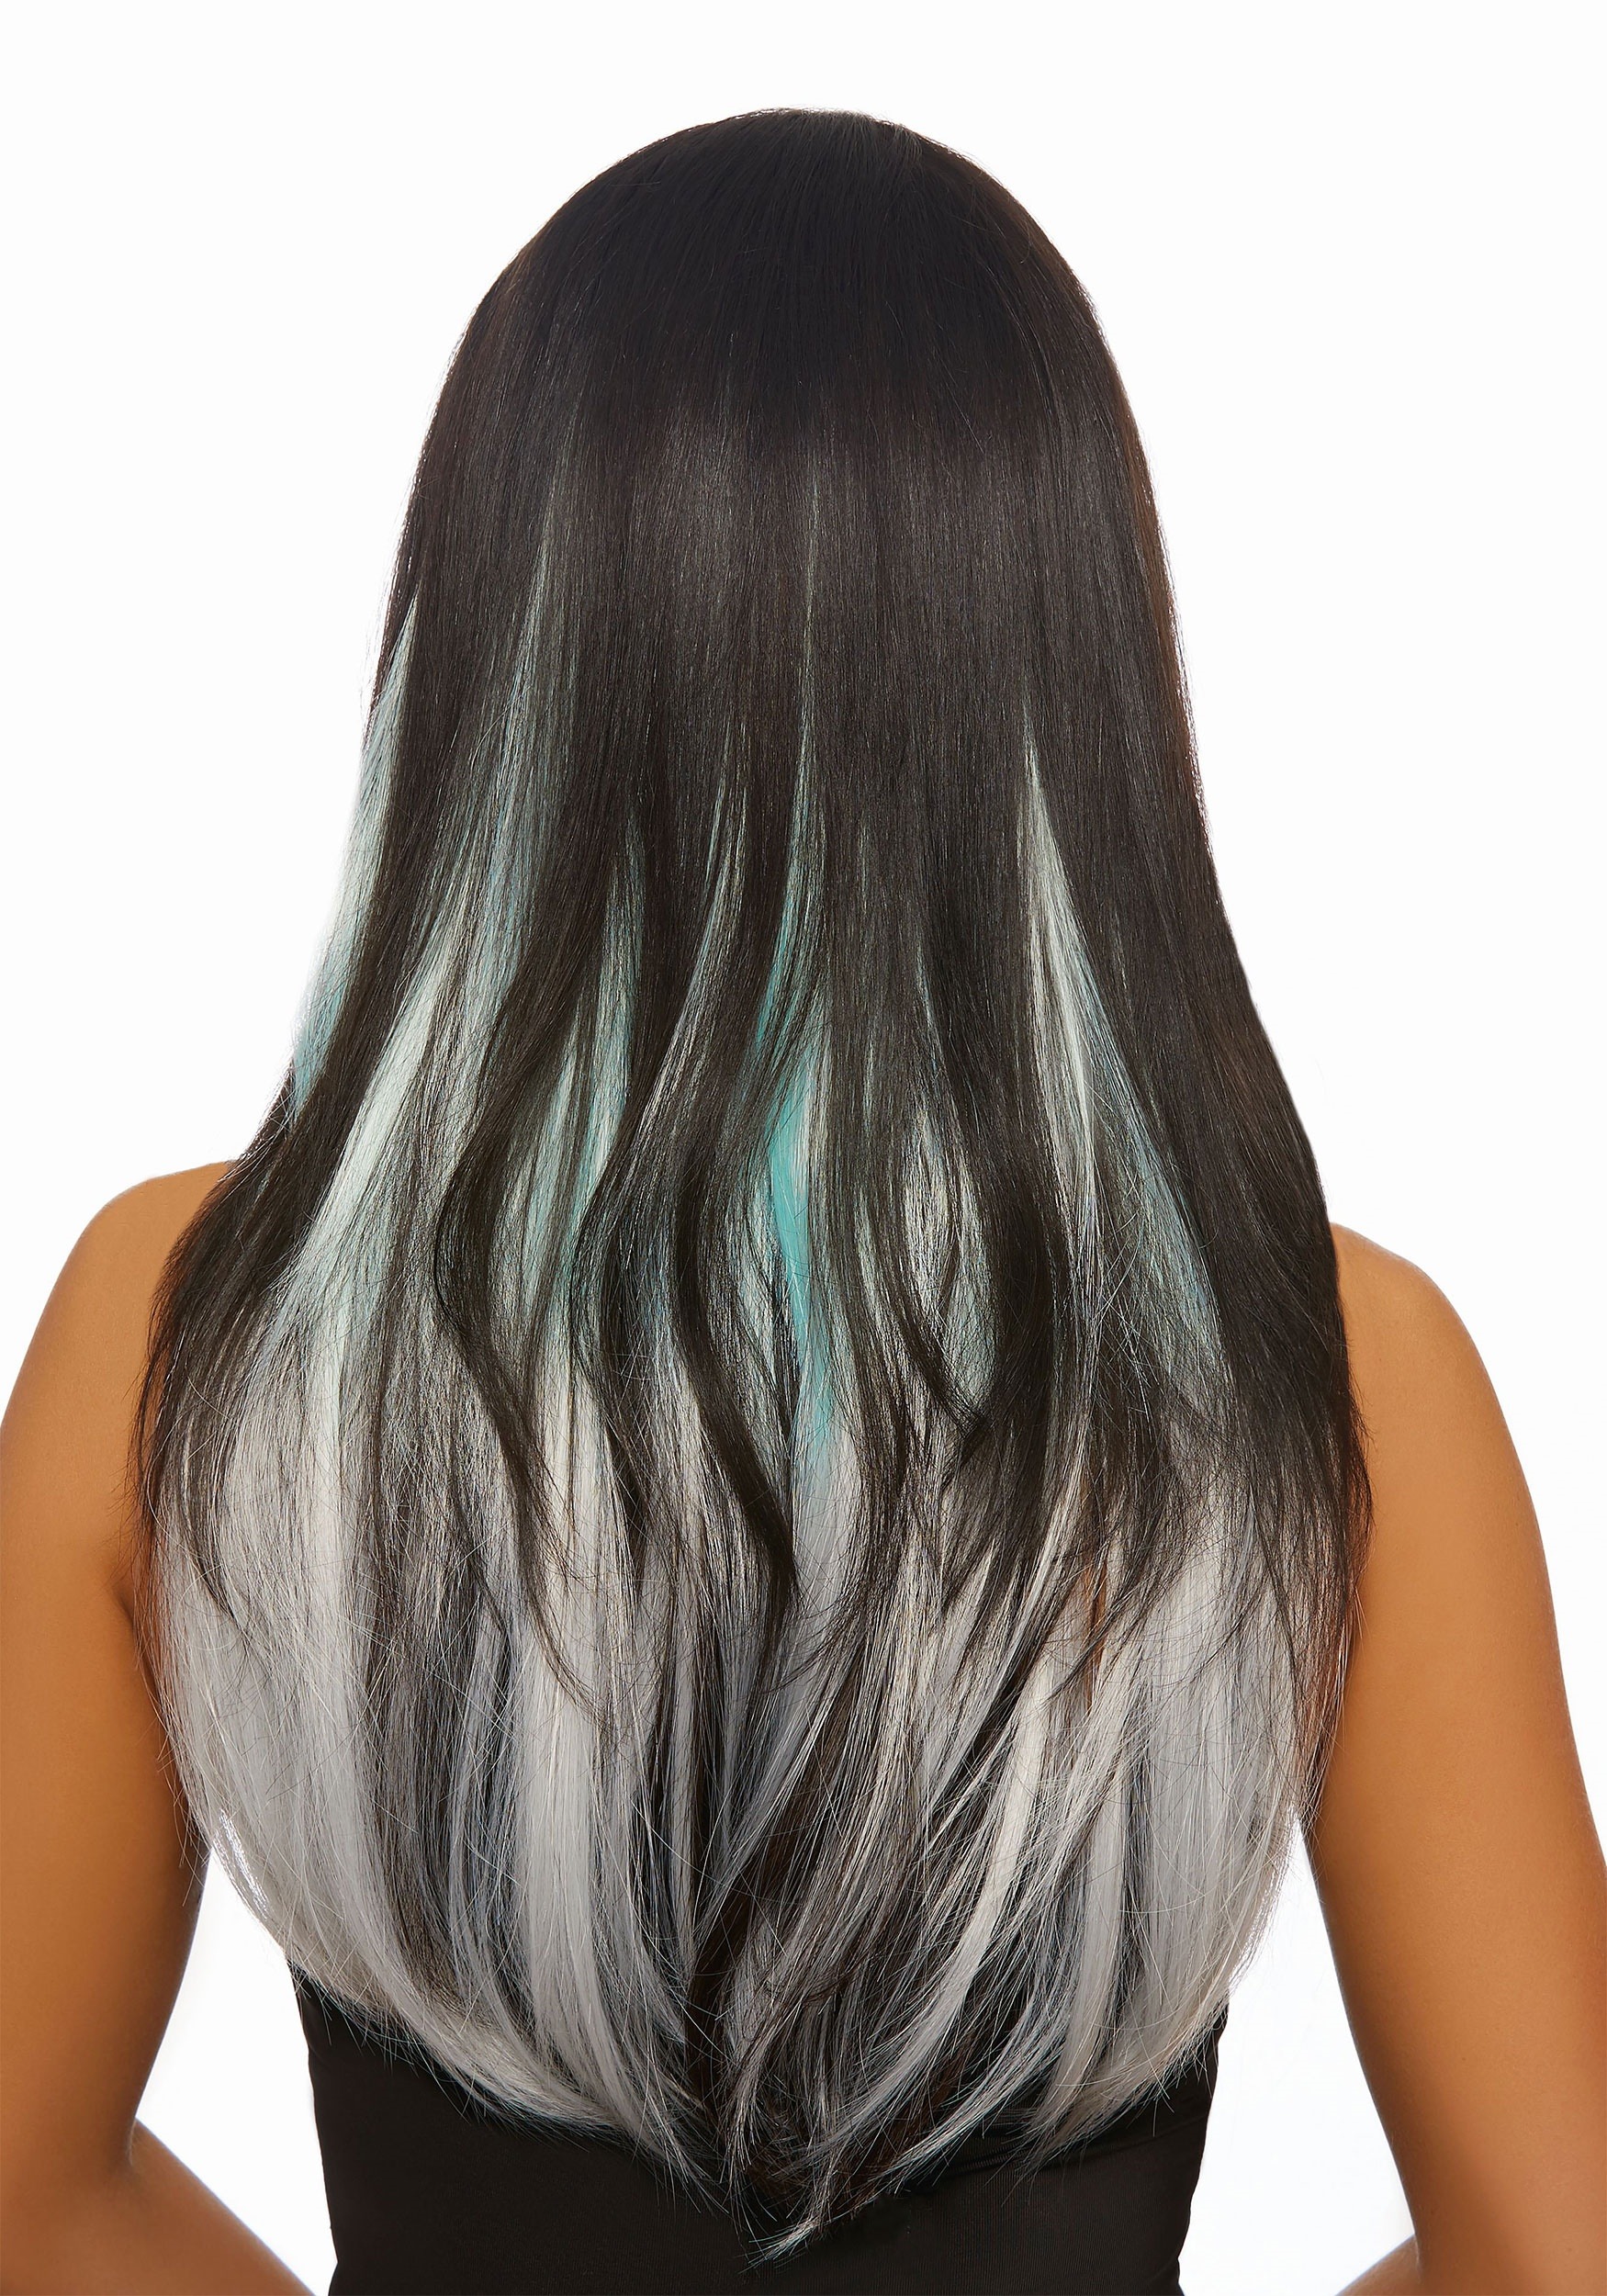 Long Straight 3 Piece Ombre Aqua Grey Hair Extensions